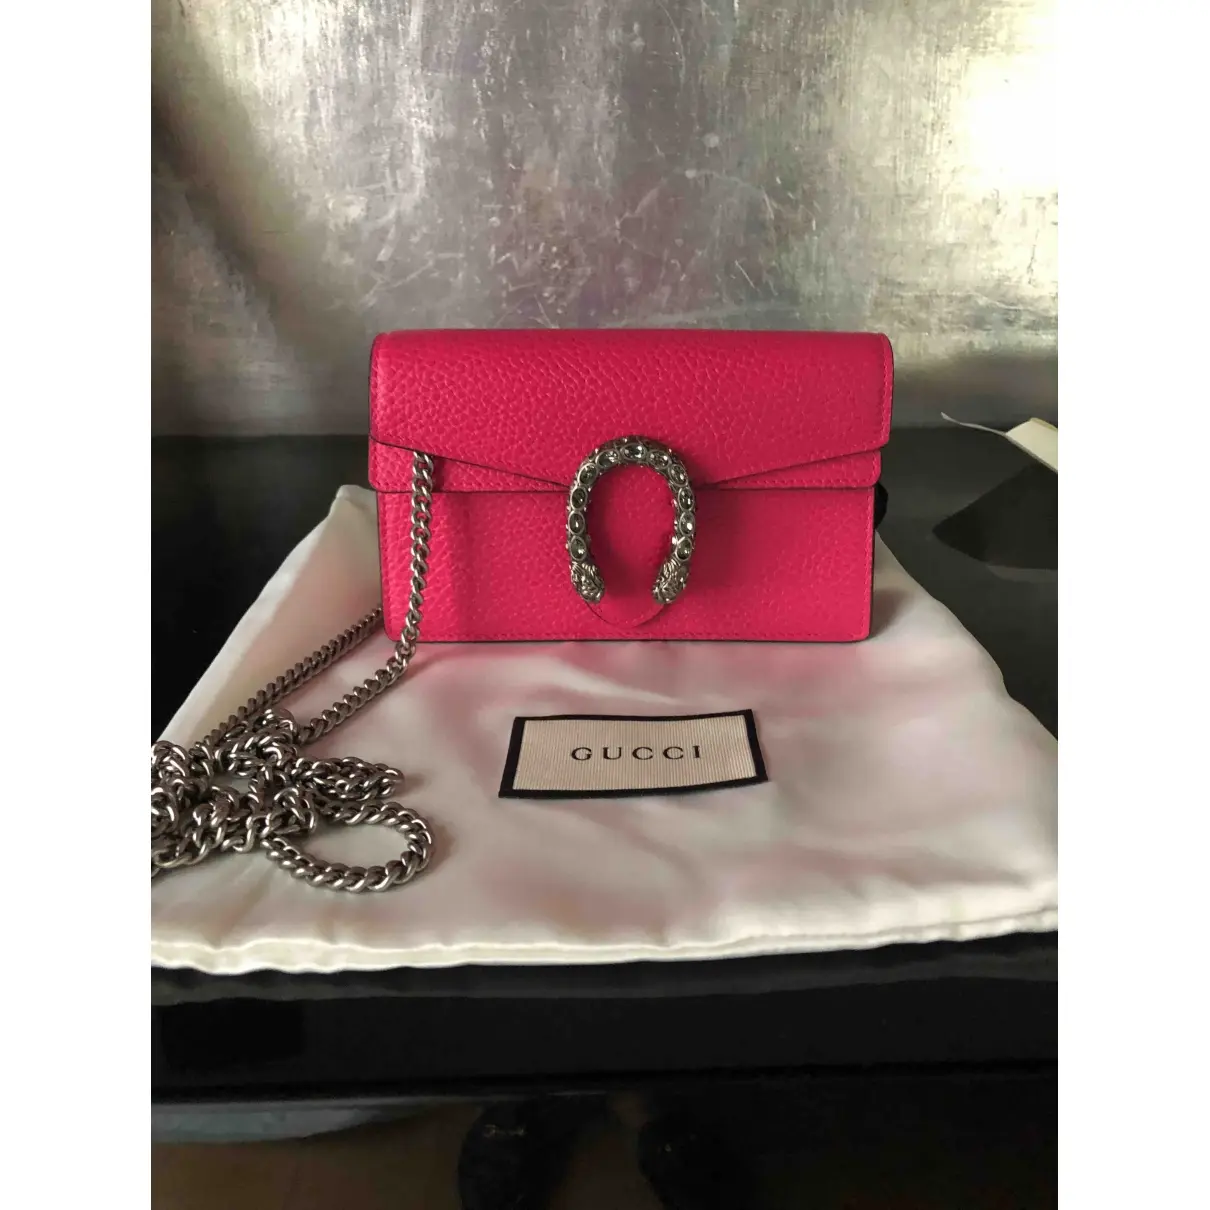 Buy Gucci Marmont leather clutch bag online